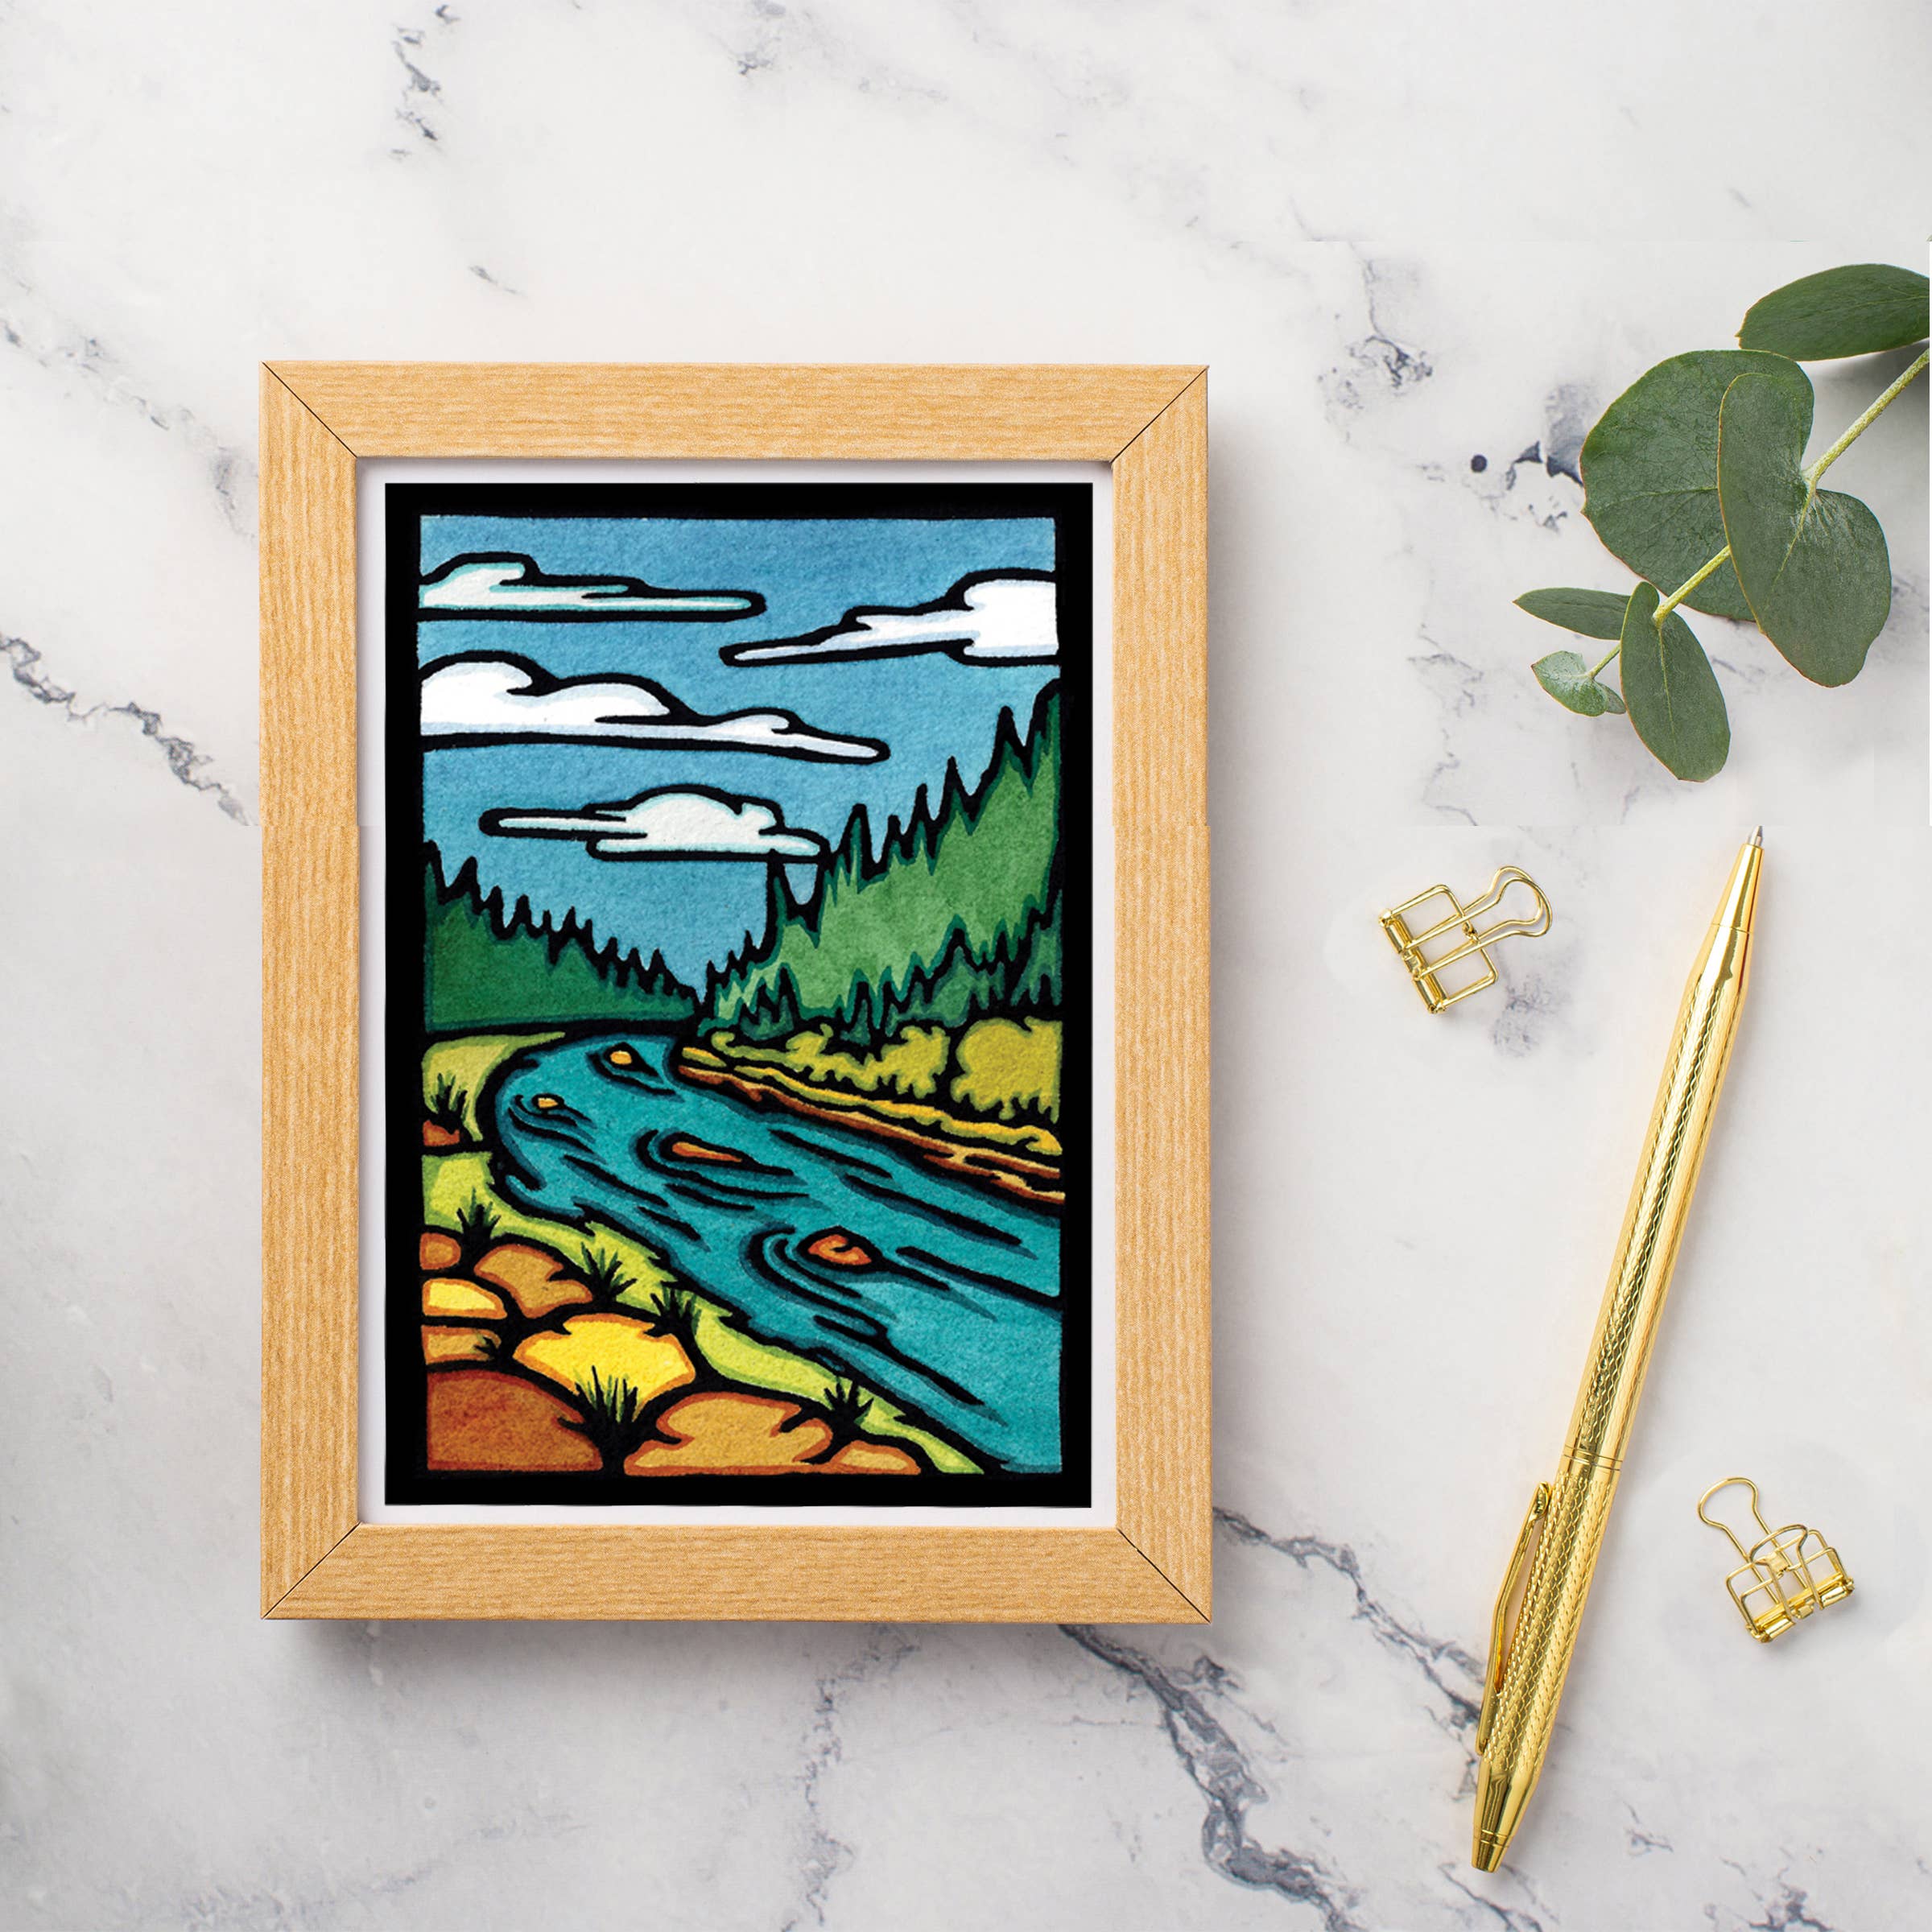 Greeting Card: The River by Sarah Angst